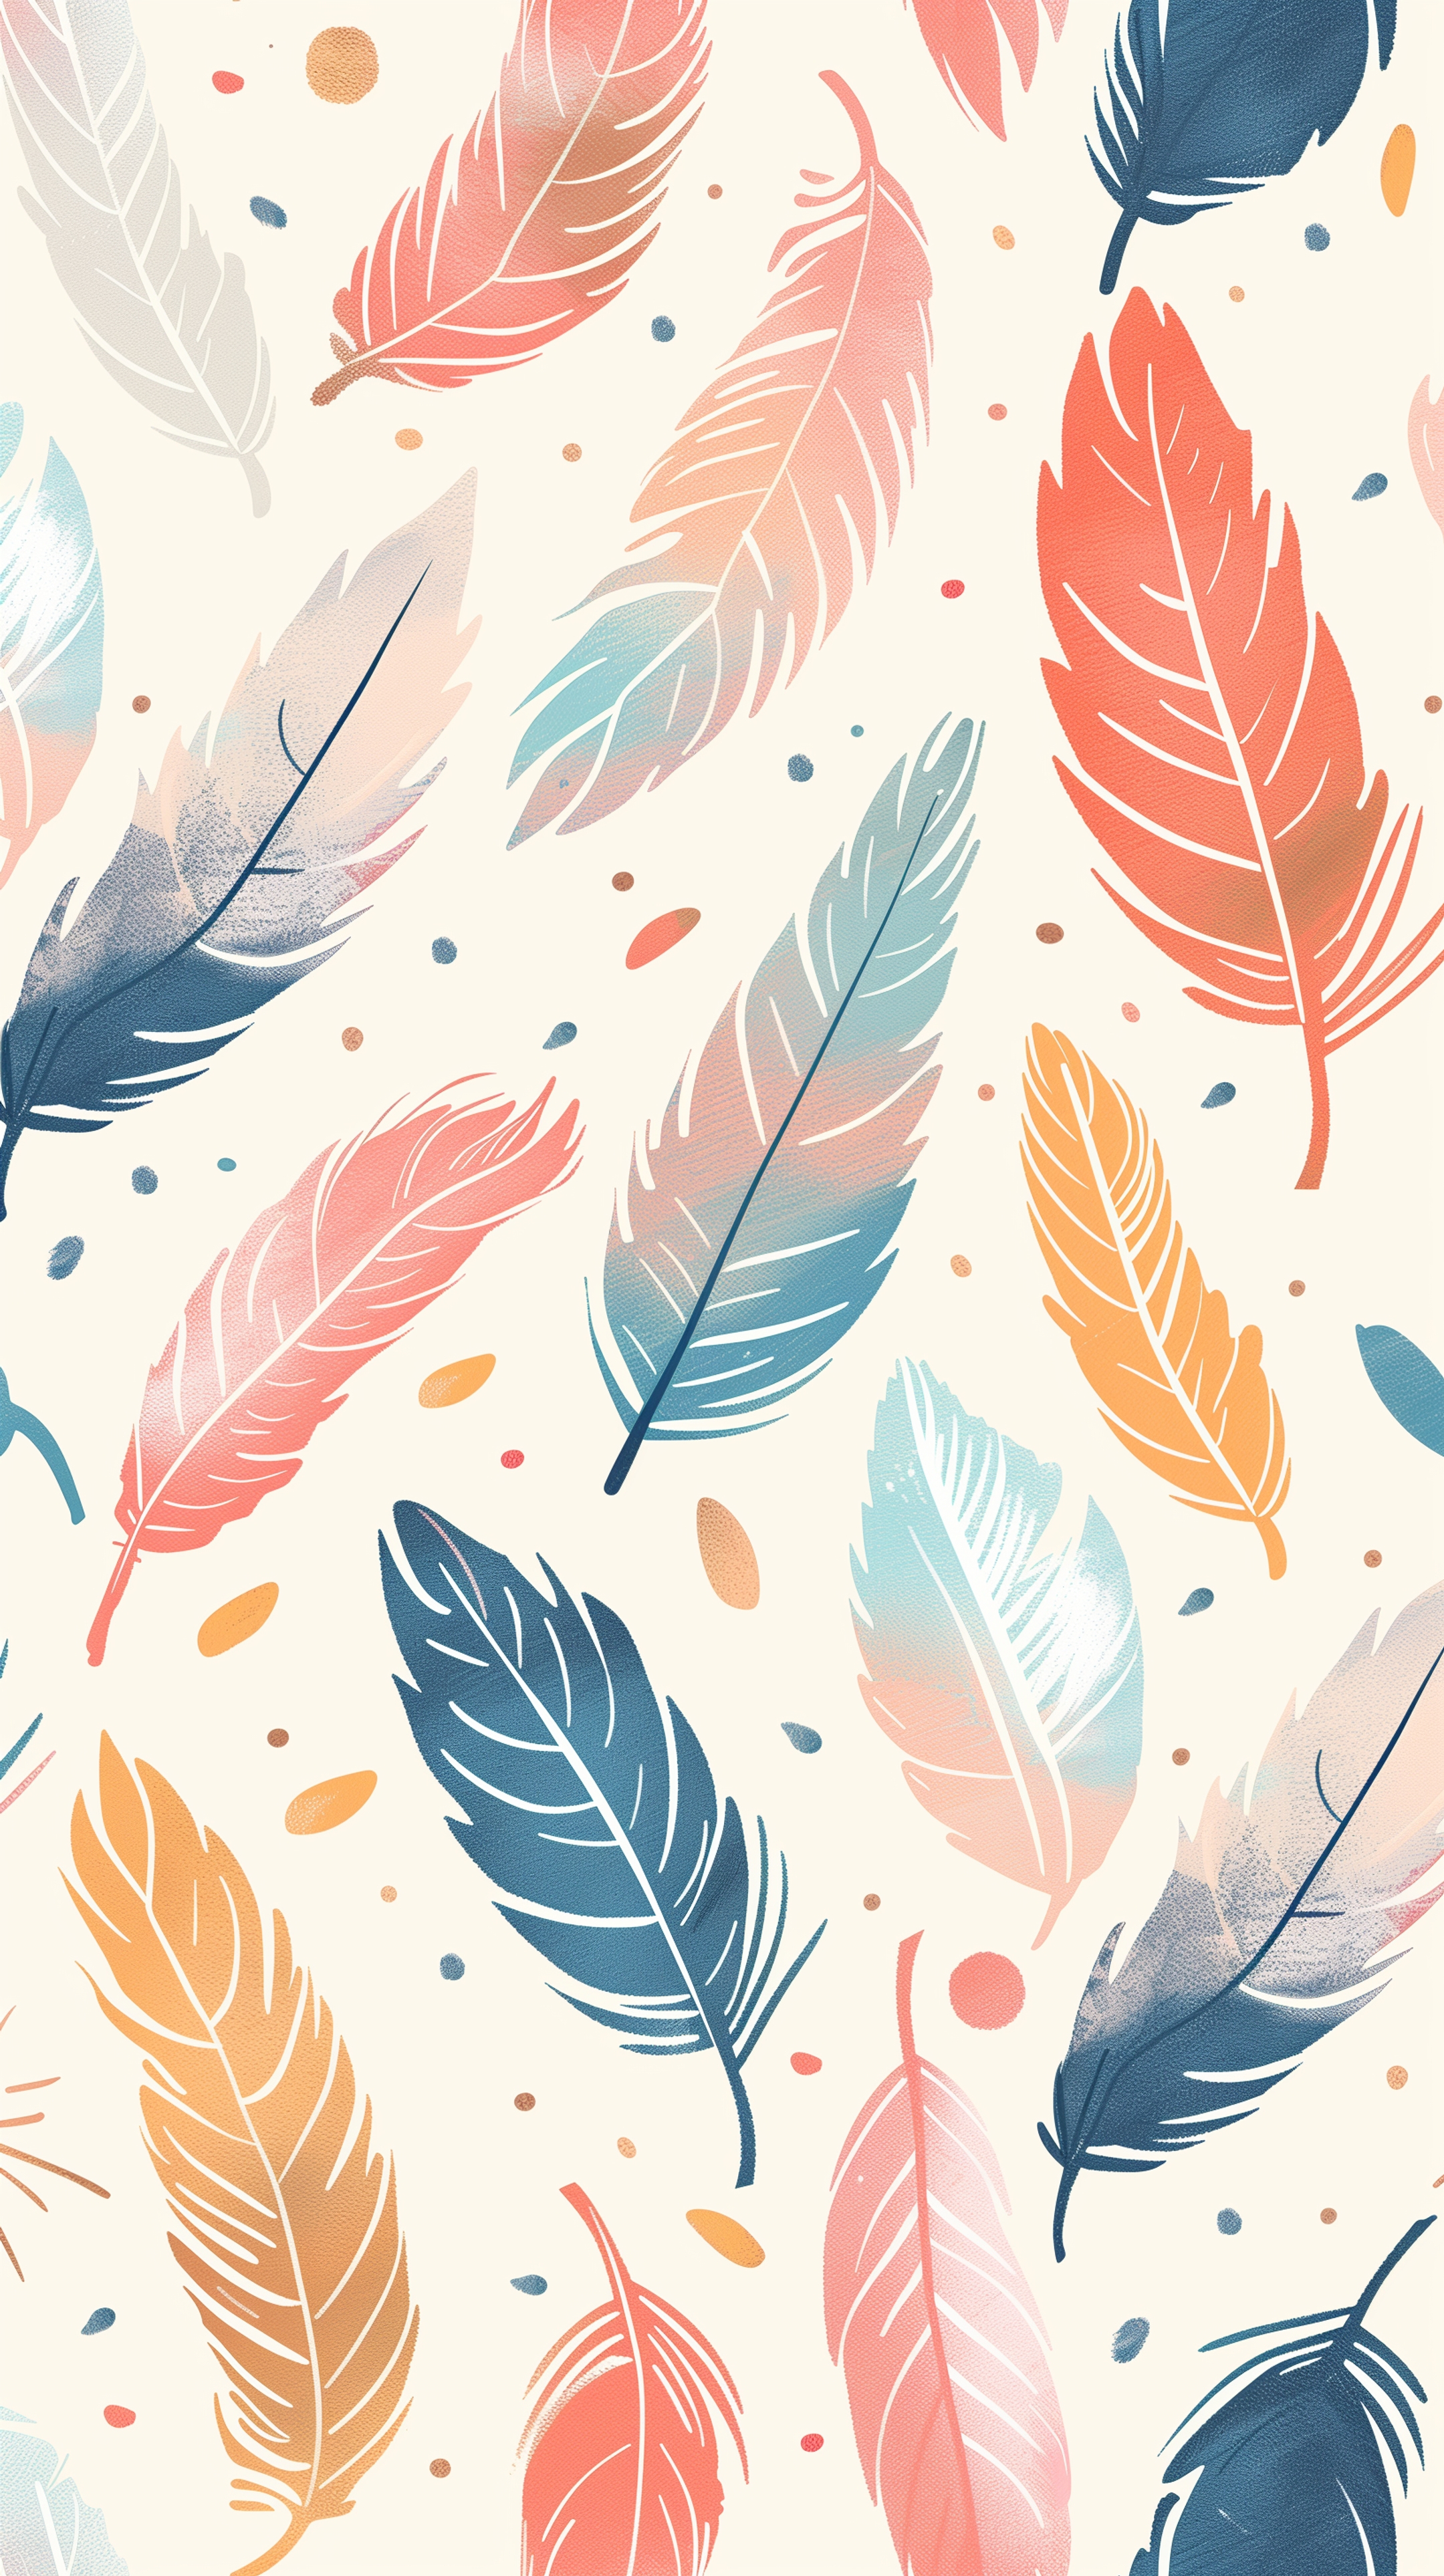 Colorful Feathers Design for Kids Behang[385f1366577146a2b959]